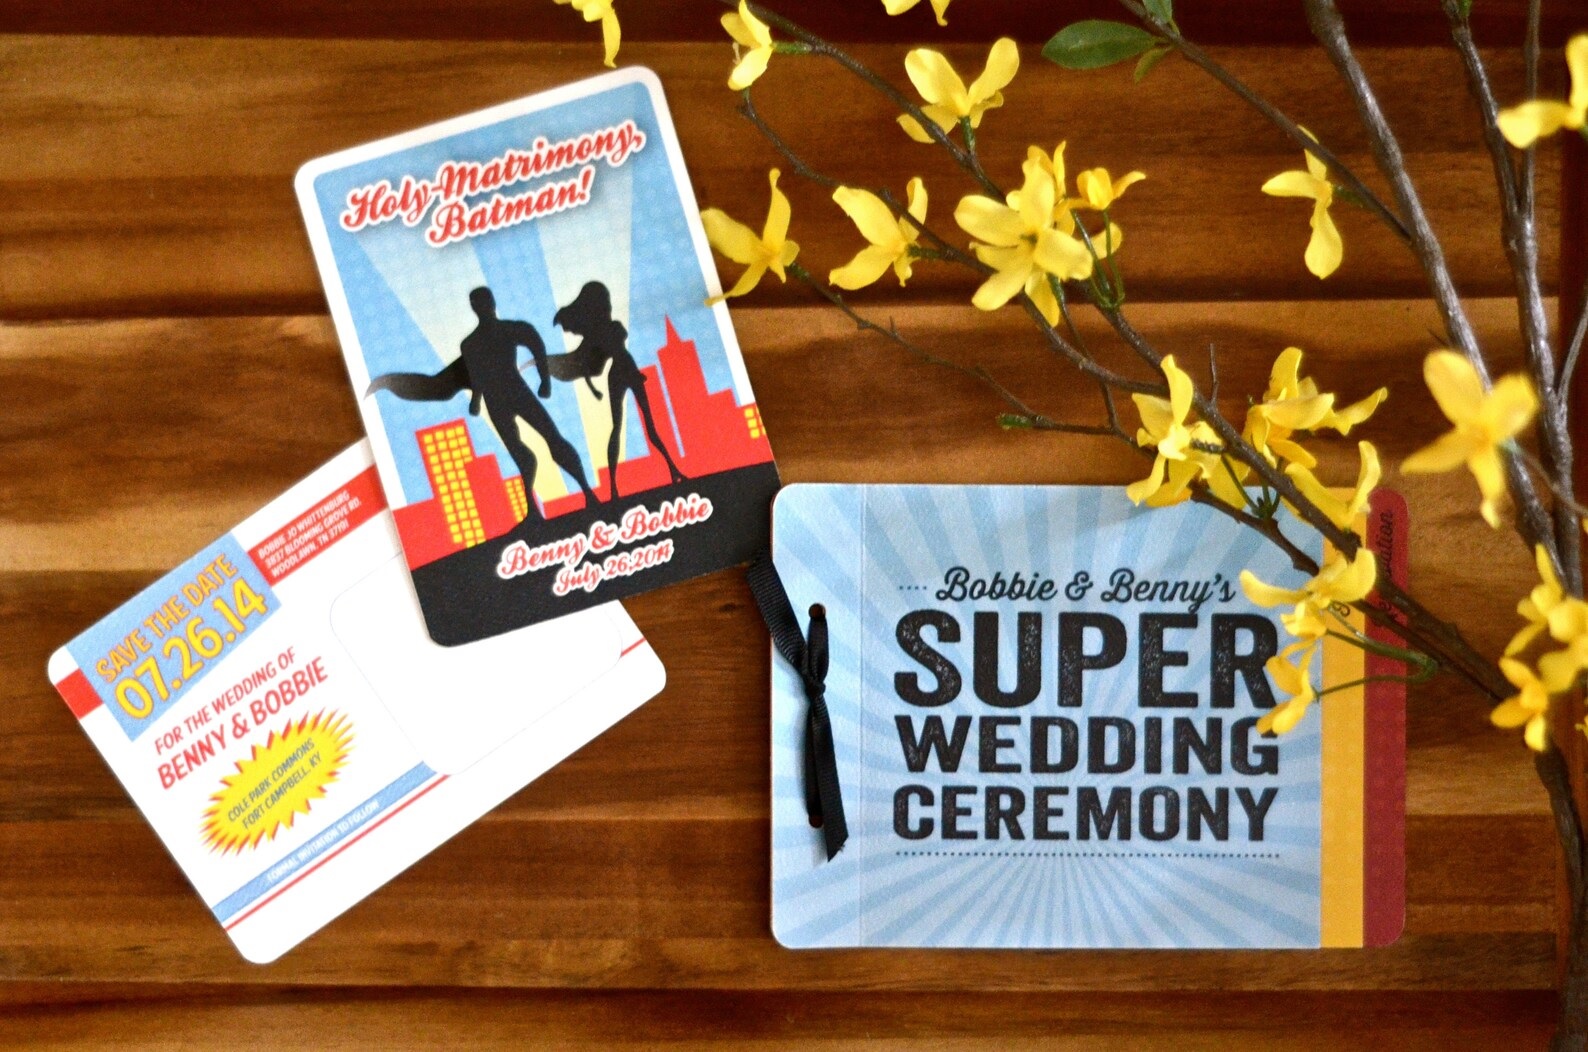 Superhero-themed wedding invitations, featuring silhouettes of a male and female superhero standing side by side